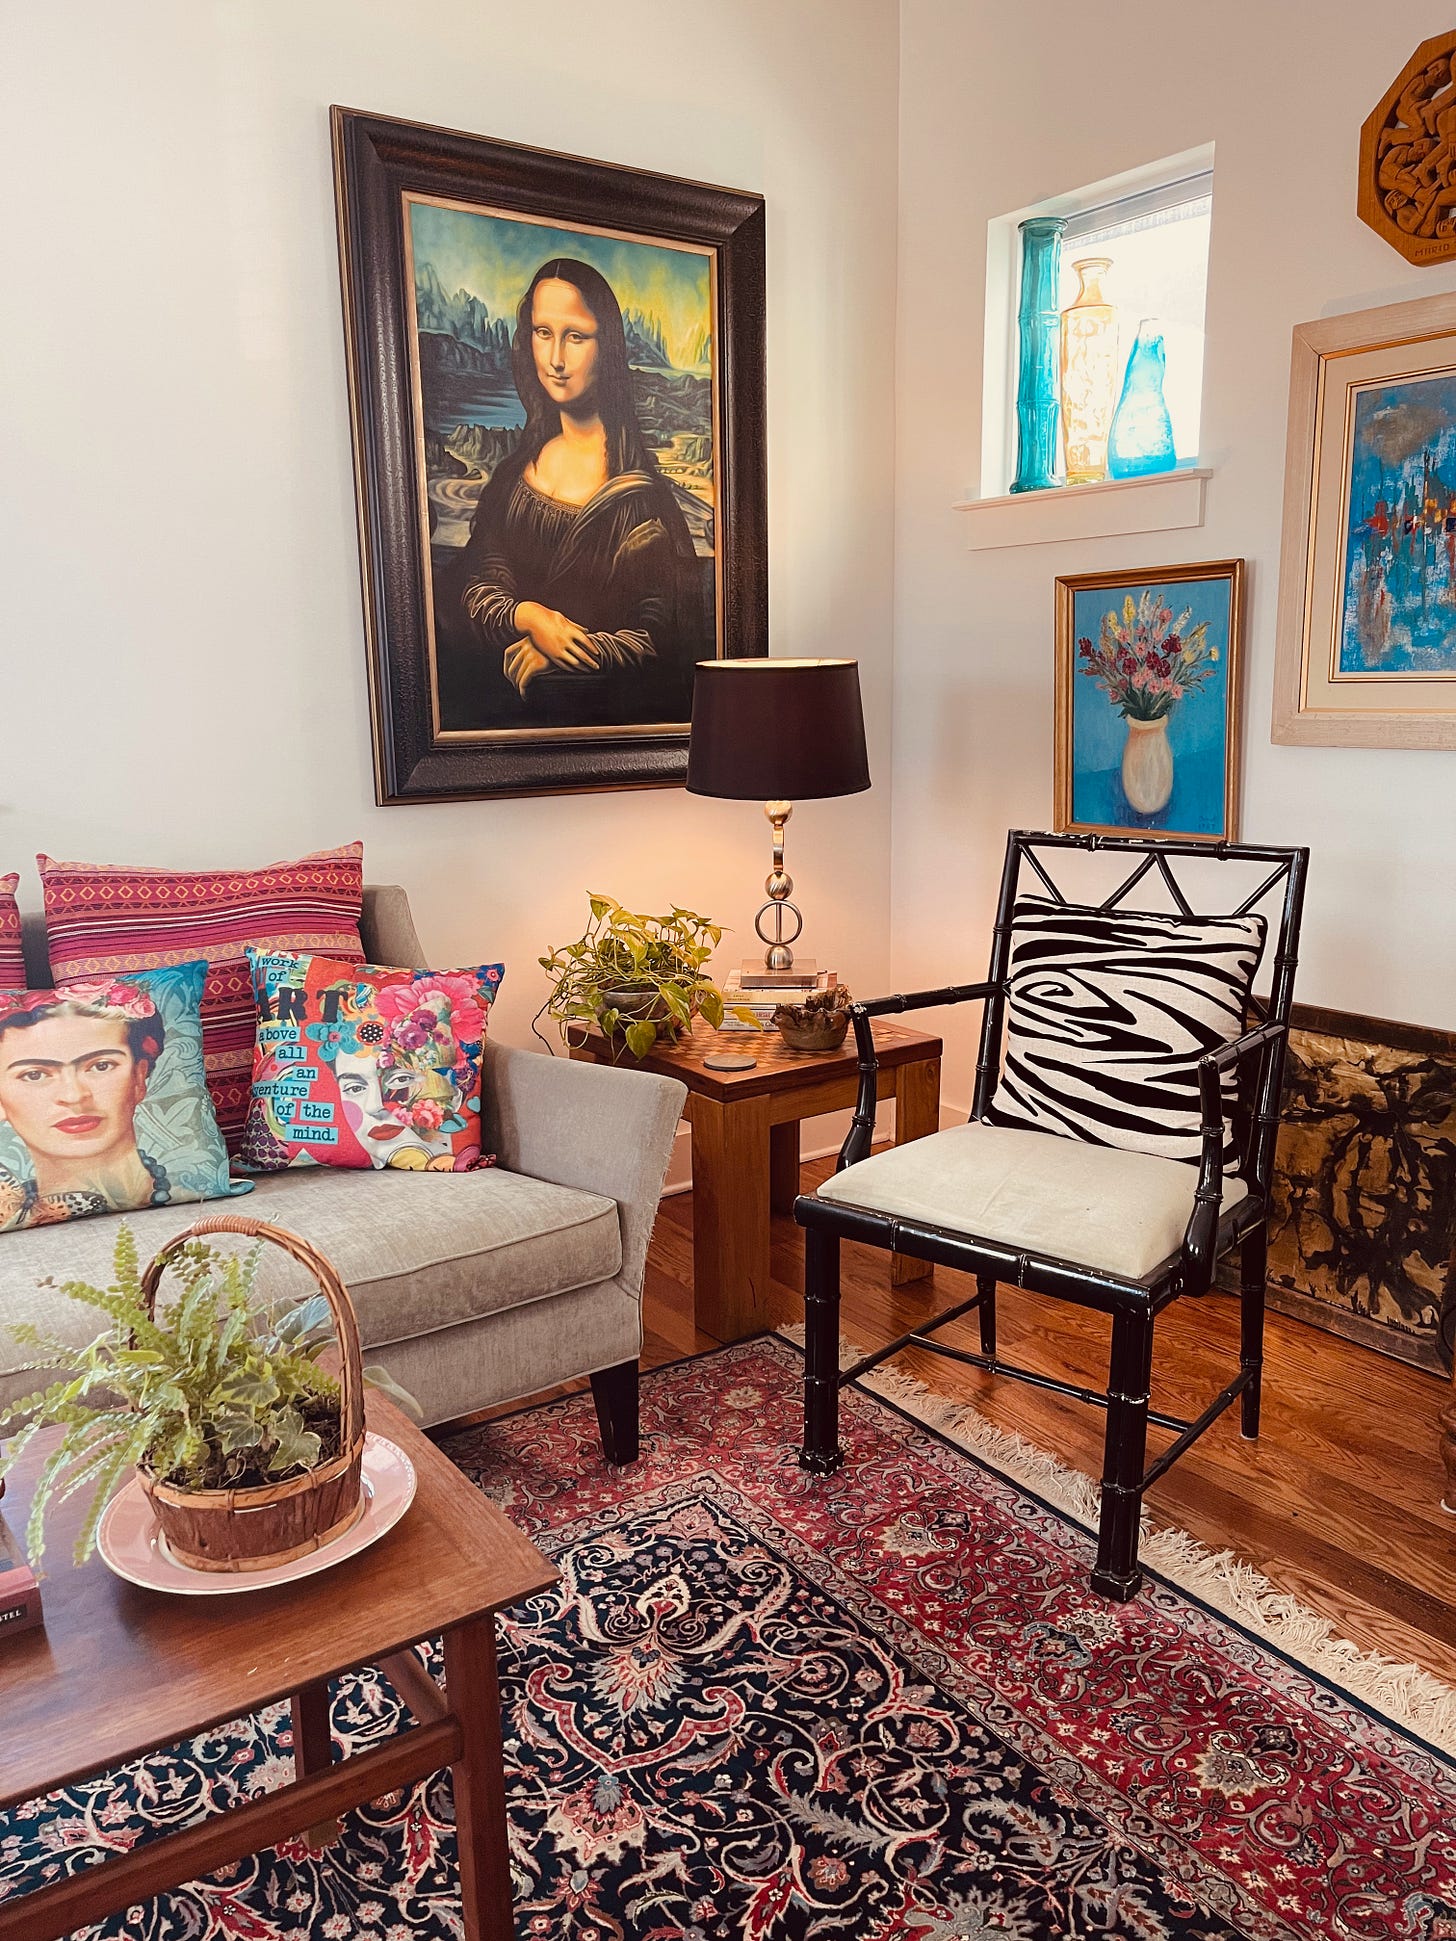 Mona Lisa painting and Frida pillows, oriental rugs and zebra prints make this home decor stand out.